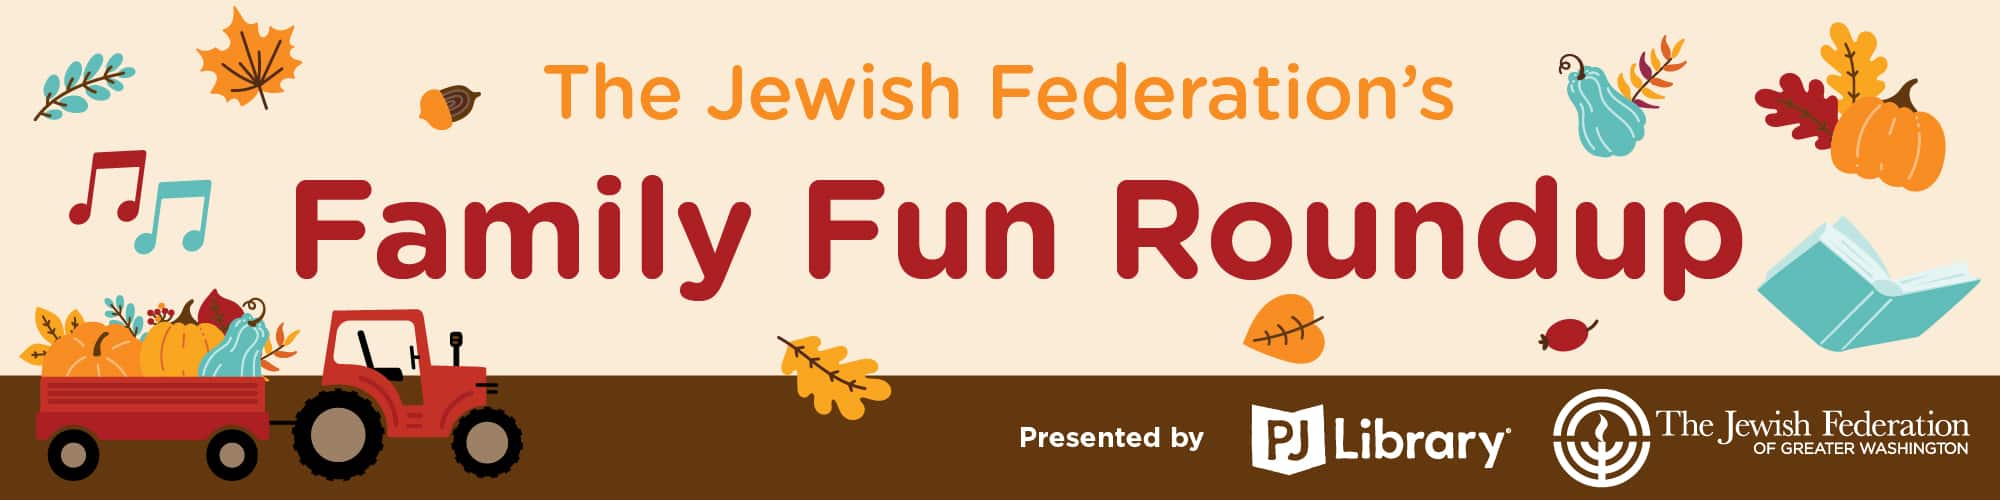 Federation Family Fun Roundup Fall Graphic